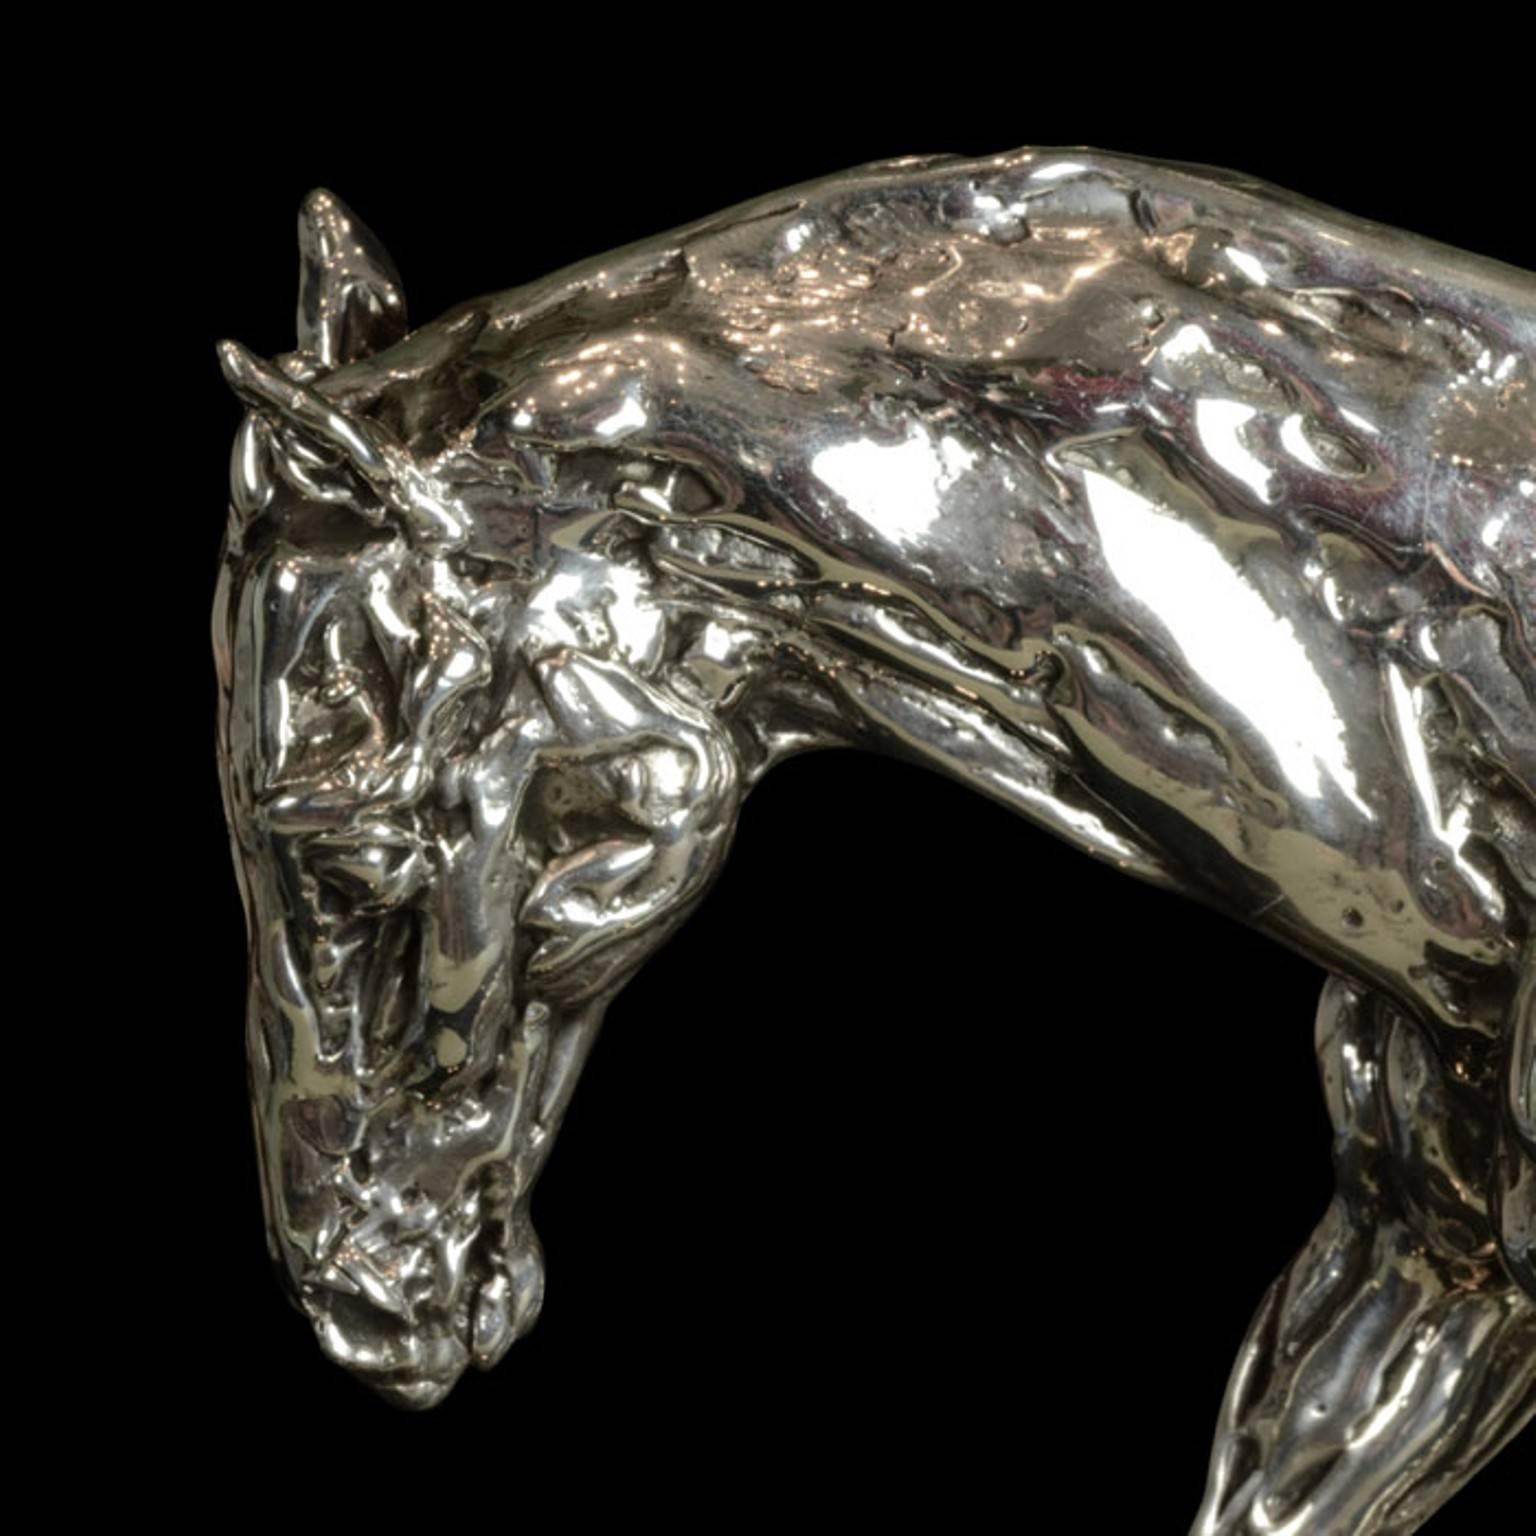 Lucy Kinsella 'Cantering Horse' sterling silver sculpture  2